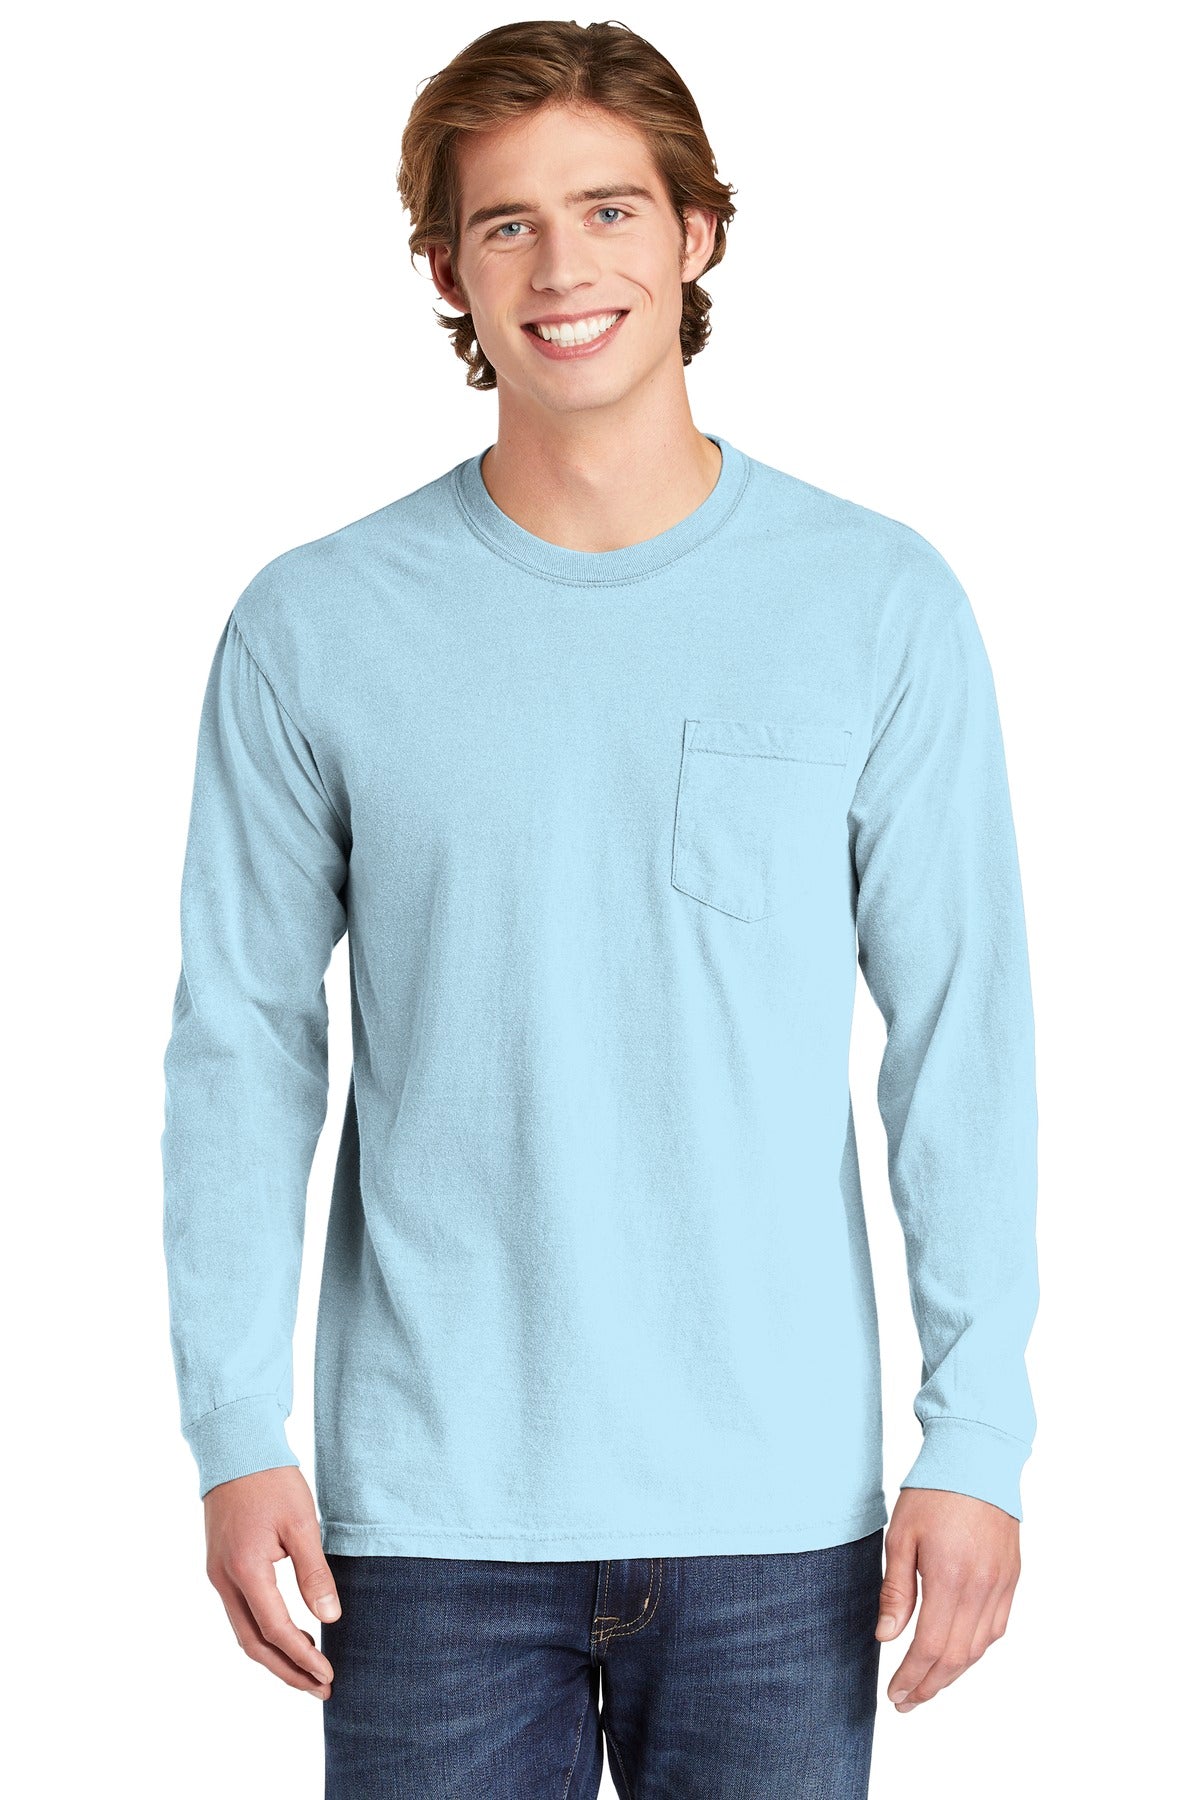 Photo of Comfort Colors T-Shirts 4410  color  Chambray